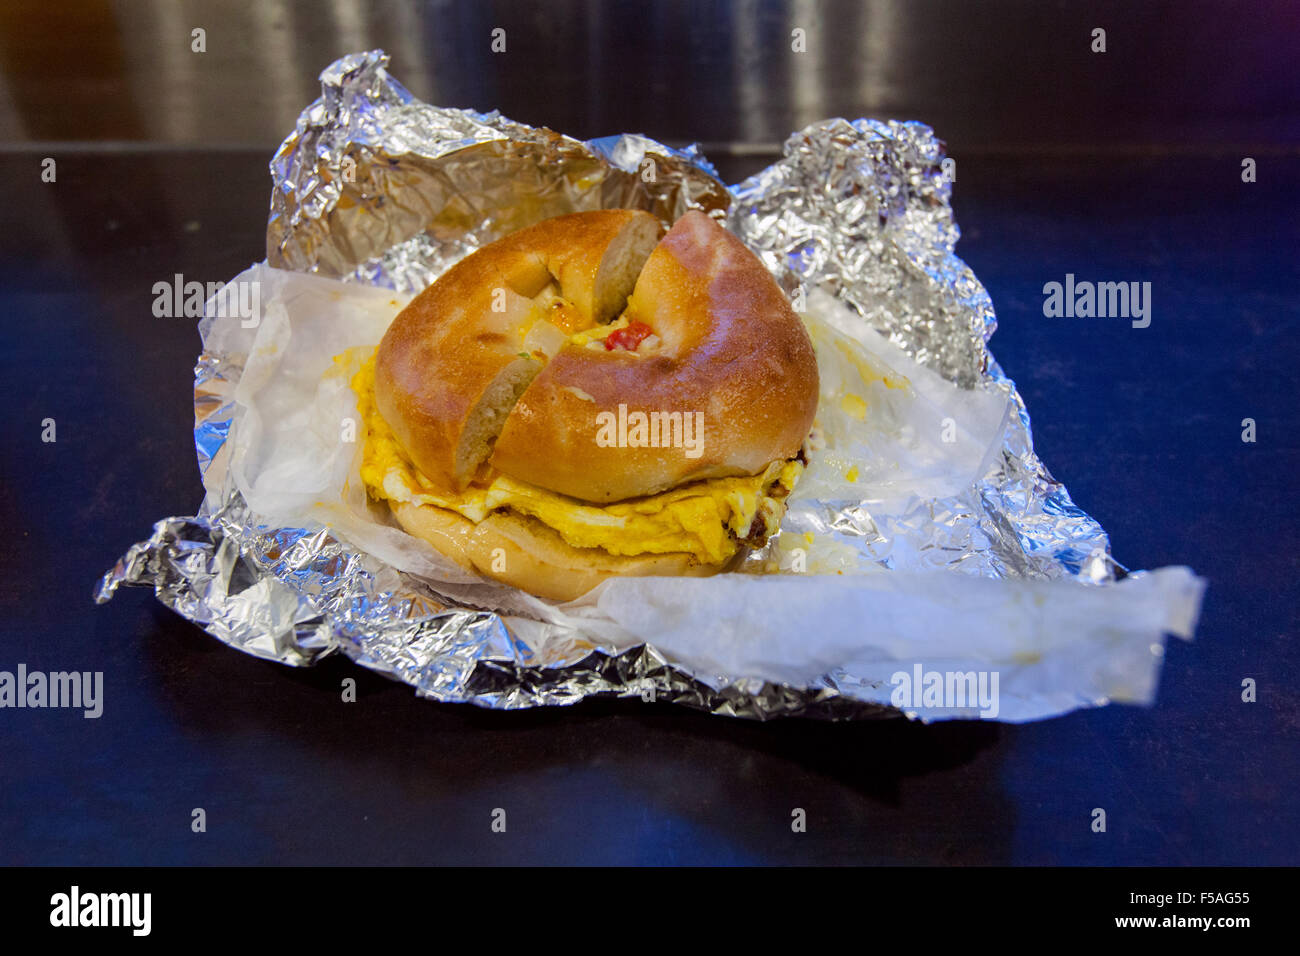 Spanish omelet in a toasted bagel at the Dali market delicatessen, 7th Avenue, Manhattan, New York City,America. Stock Photo